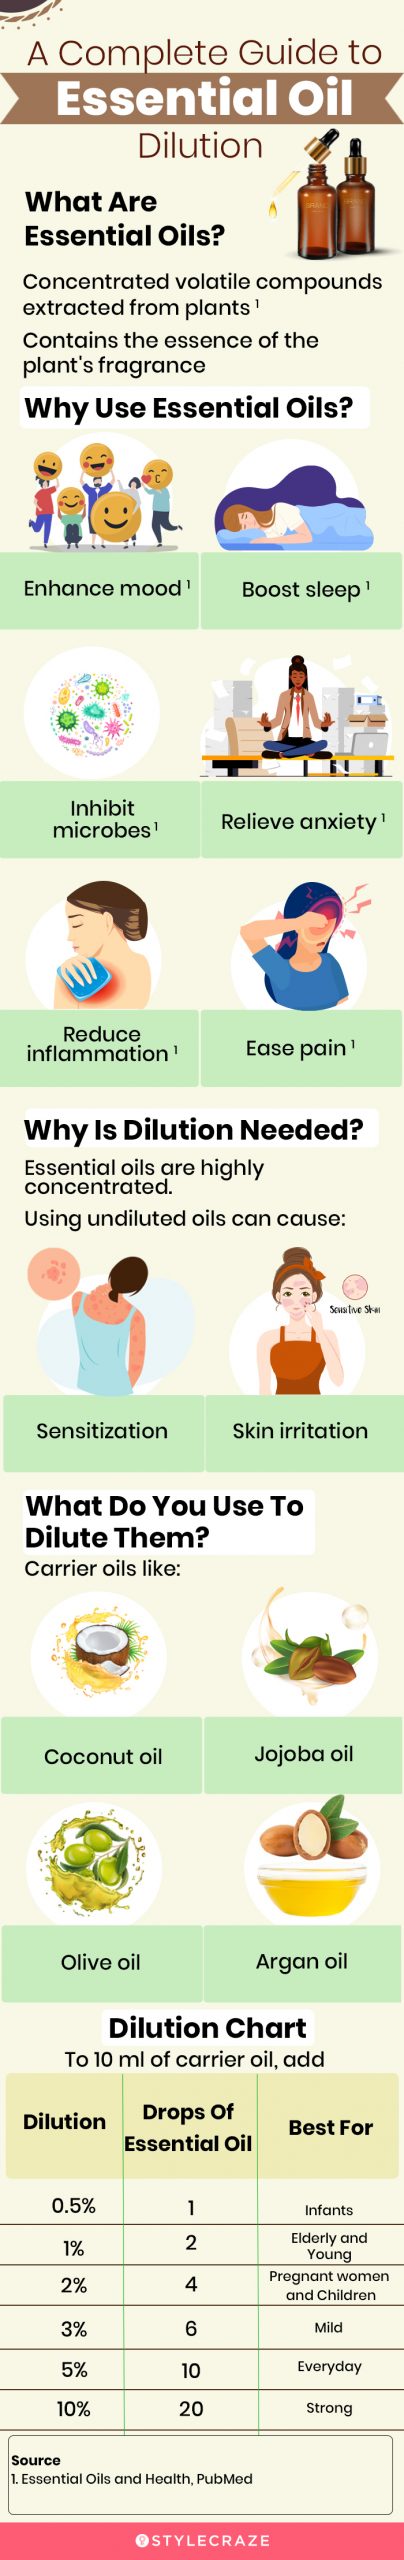 a complete guide to essential oil dilution (infographic)